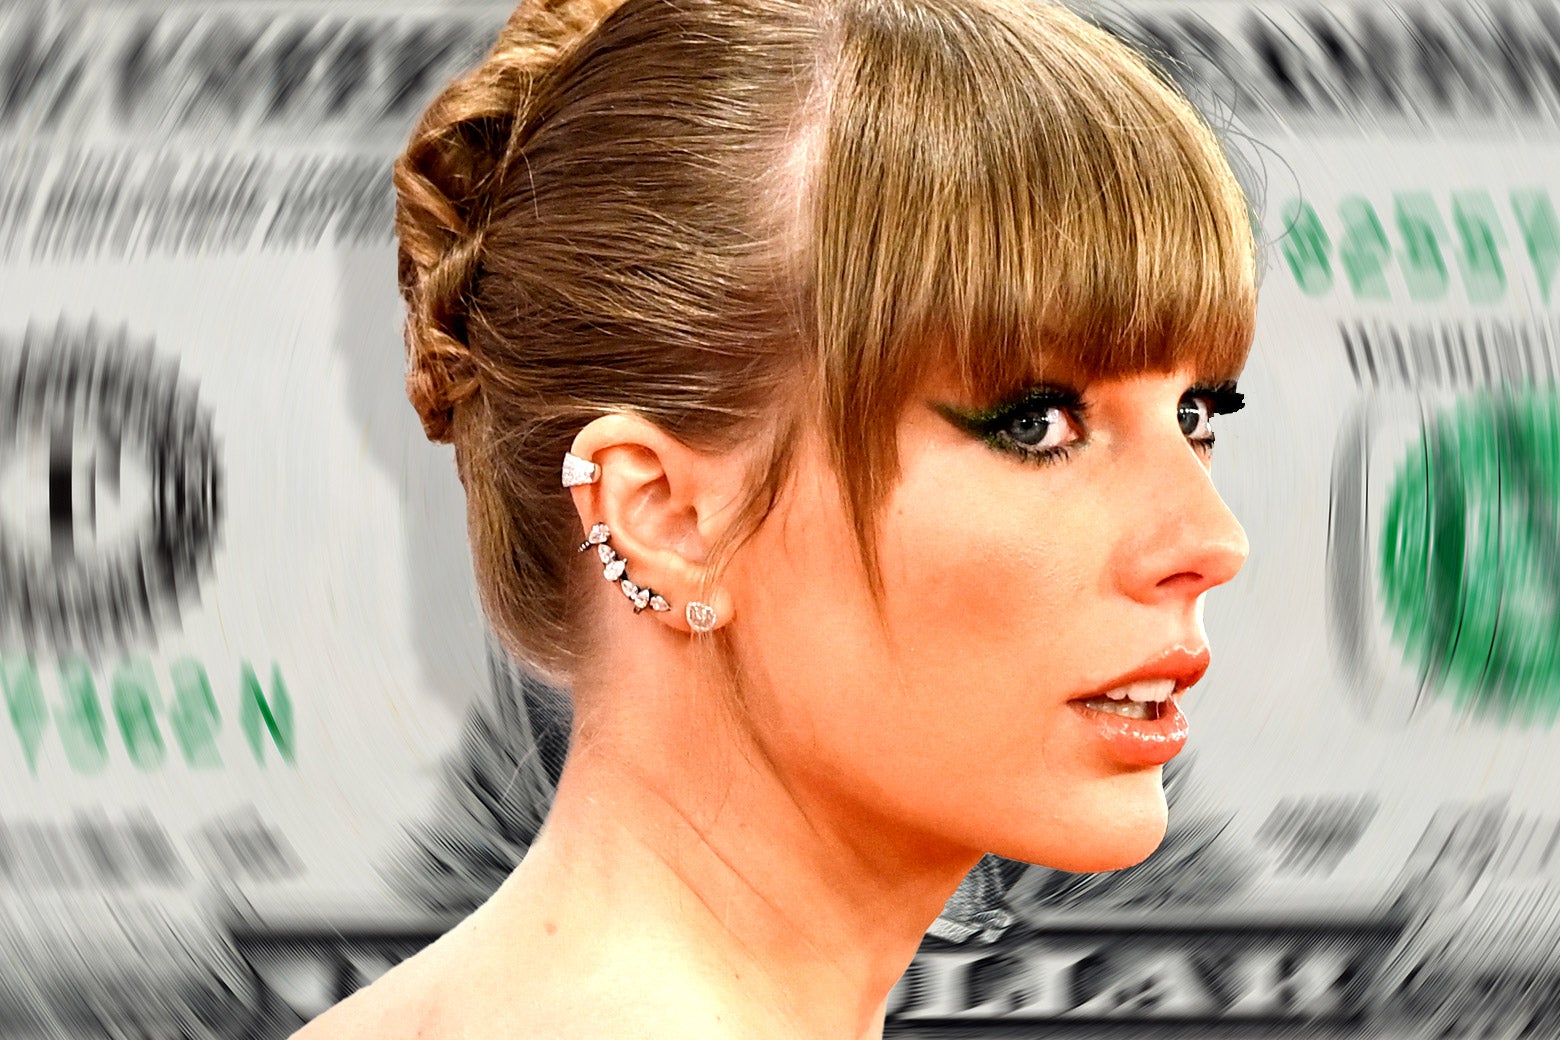 Taylor Swift with an up-do, bangs, and a shart cat eye silhouetted on a motion blurred dollar bill. 